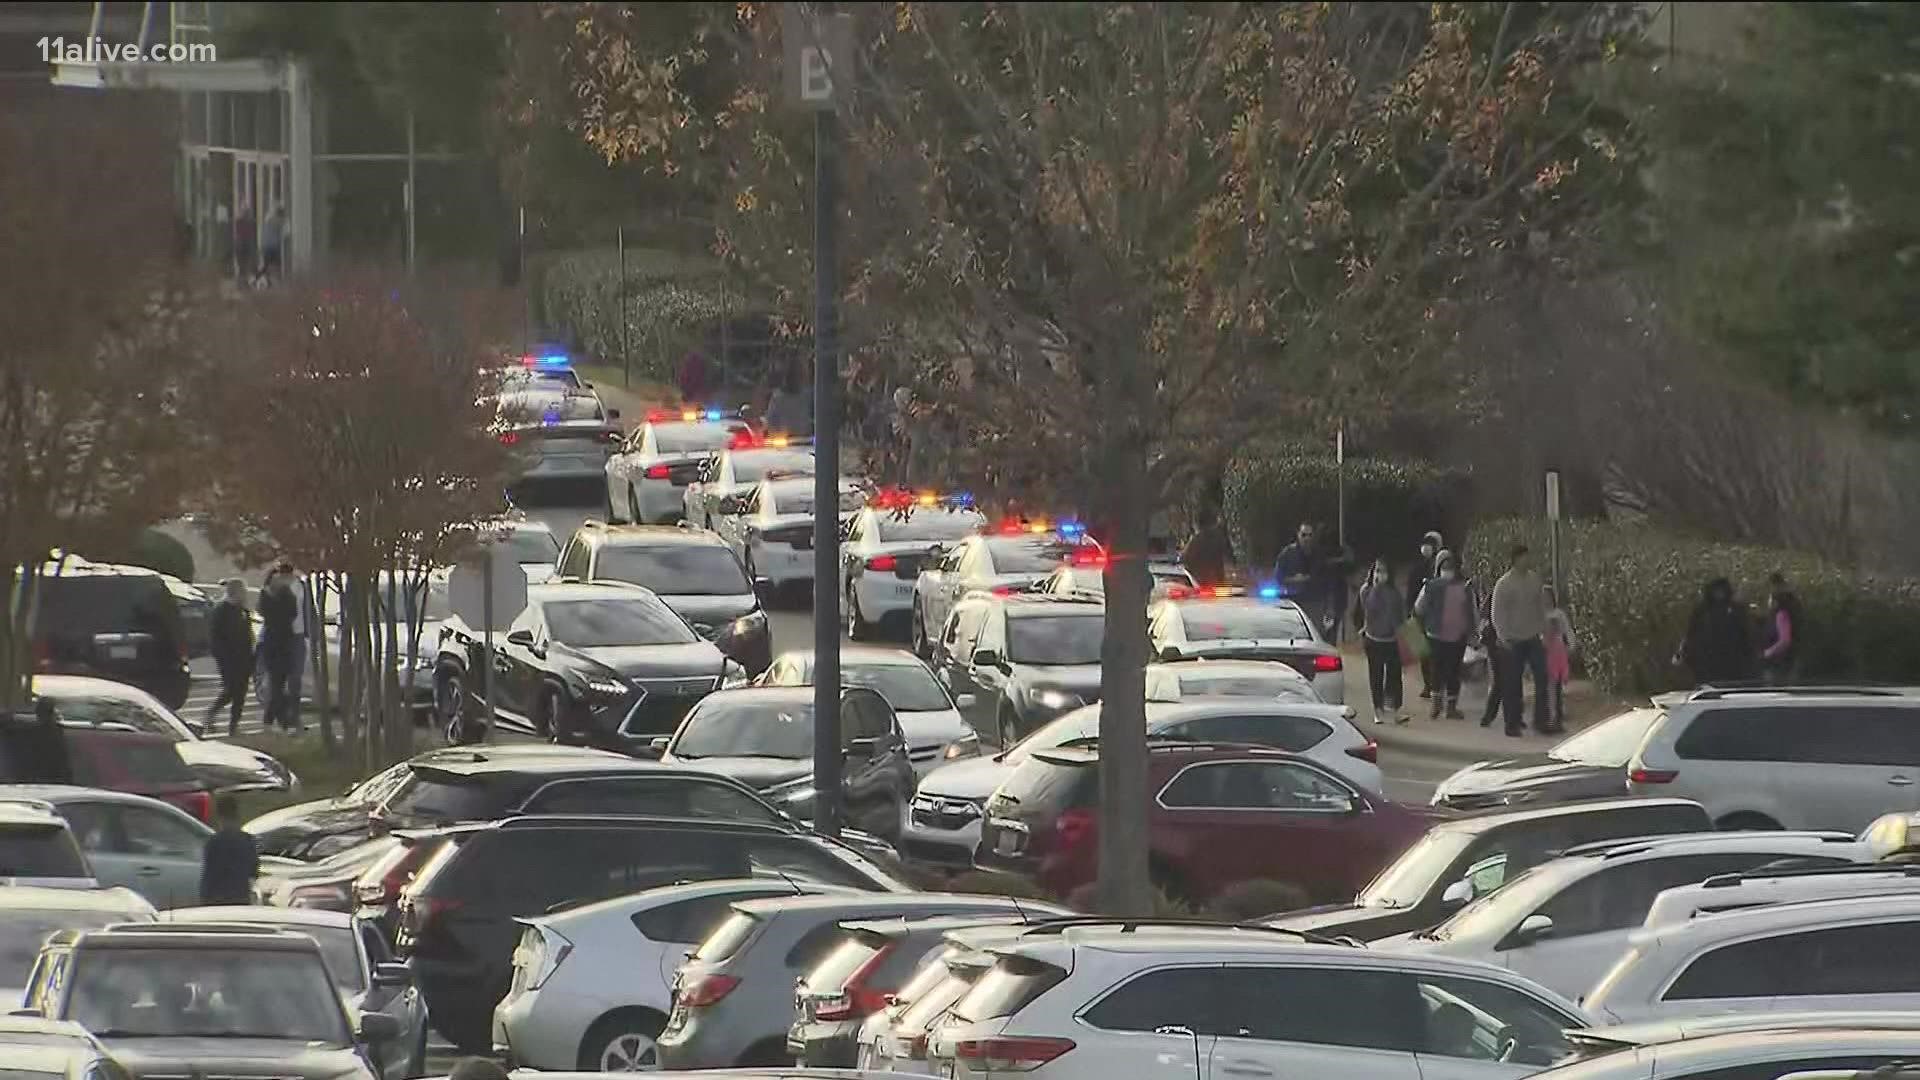 There was a brief lockdown until police could escort shoppers out of the mall.